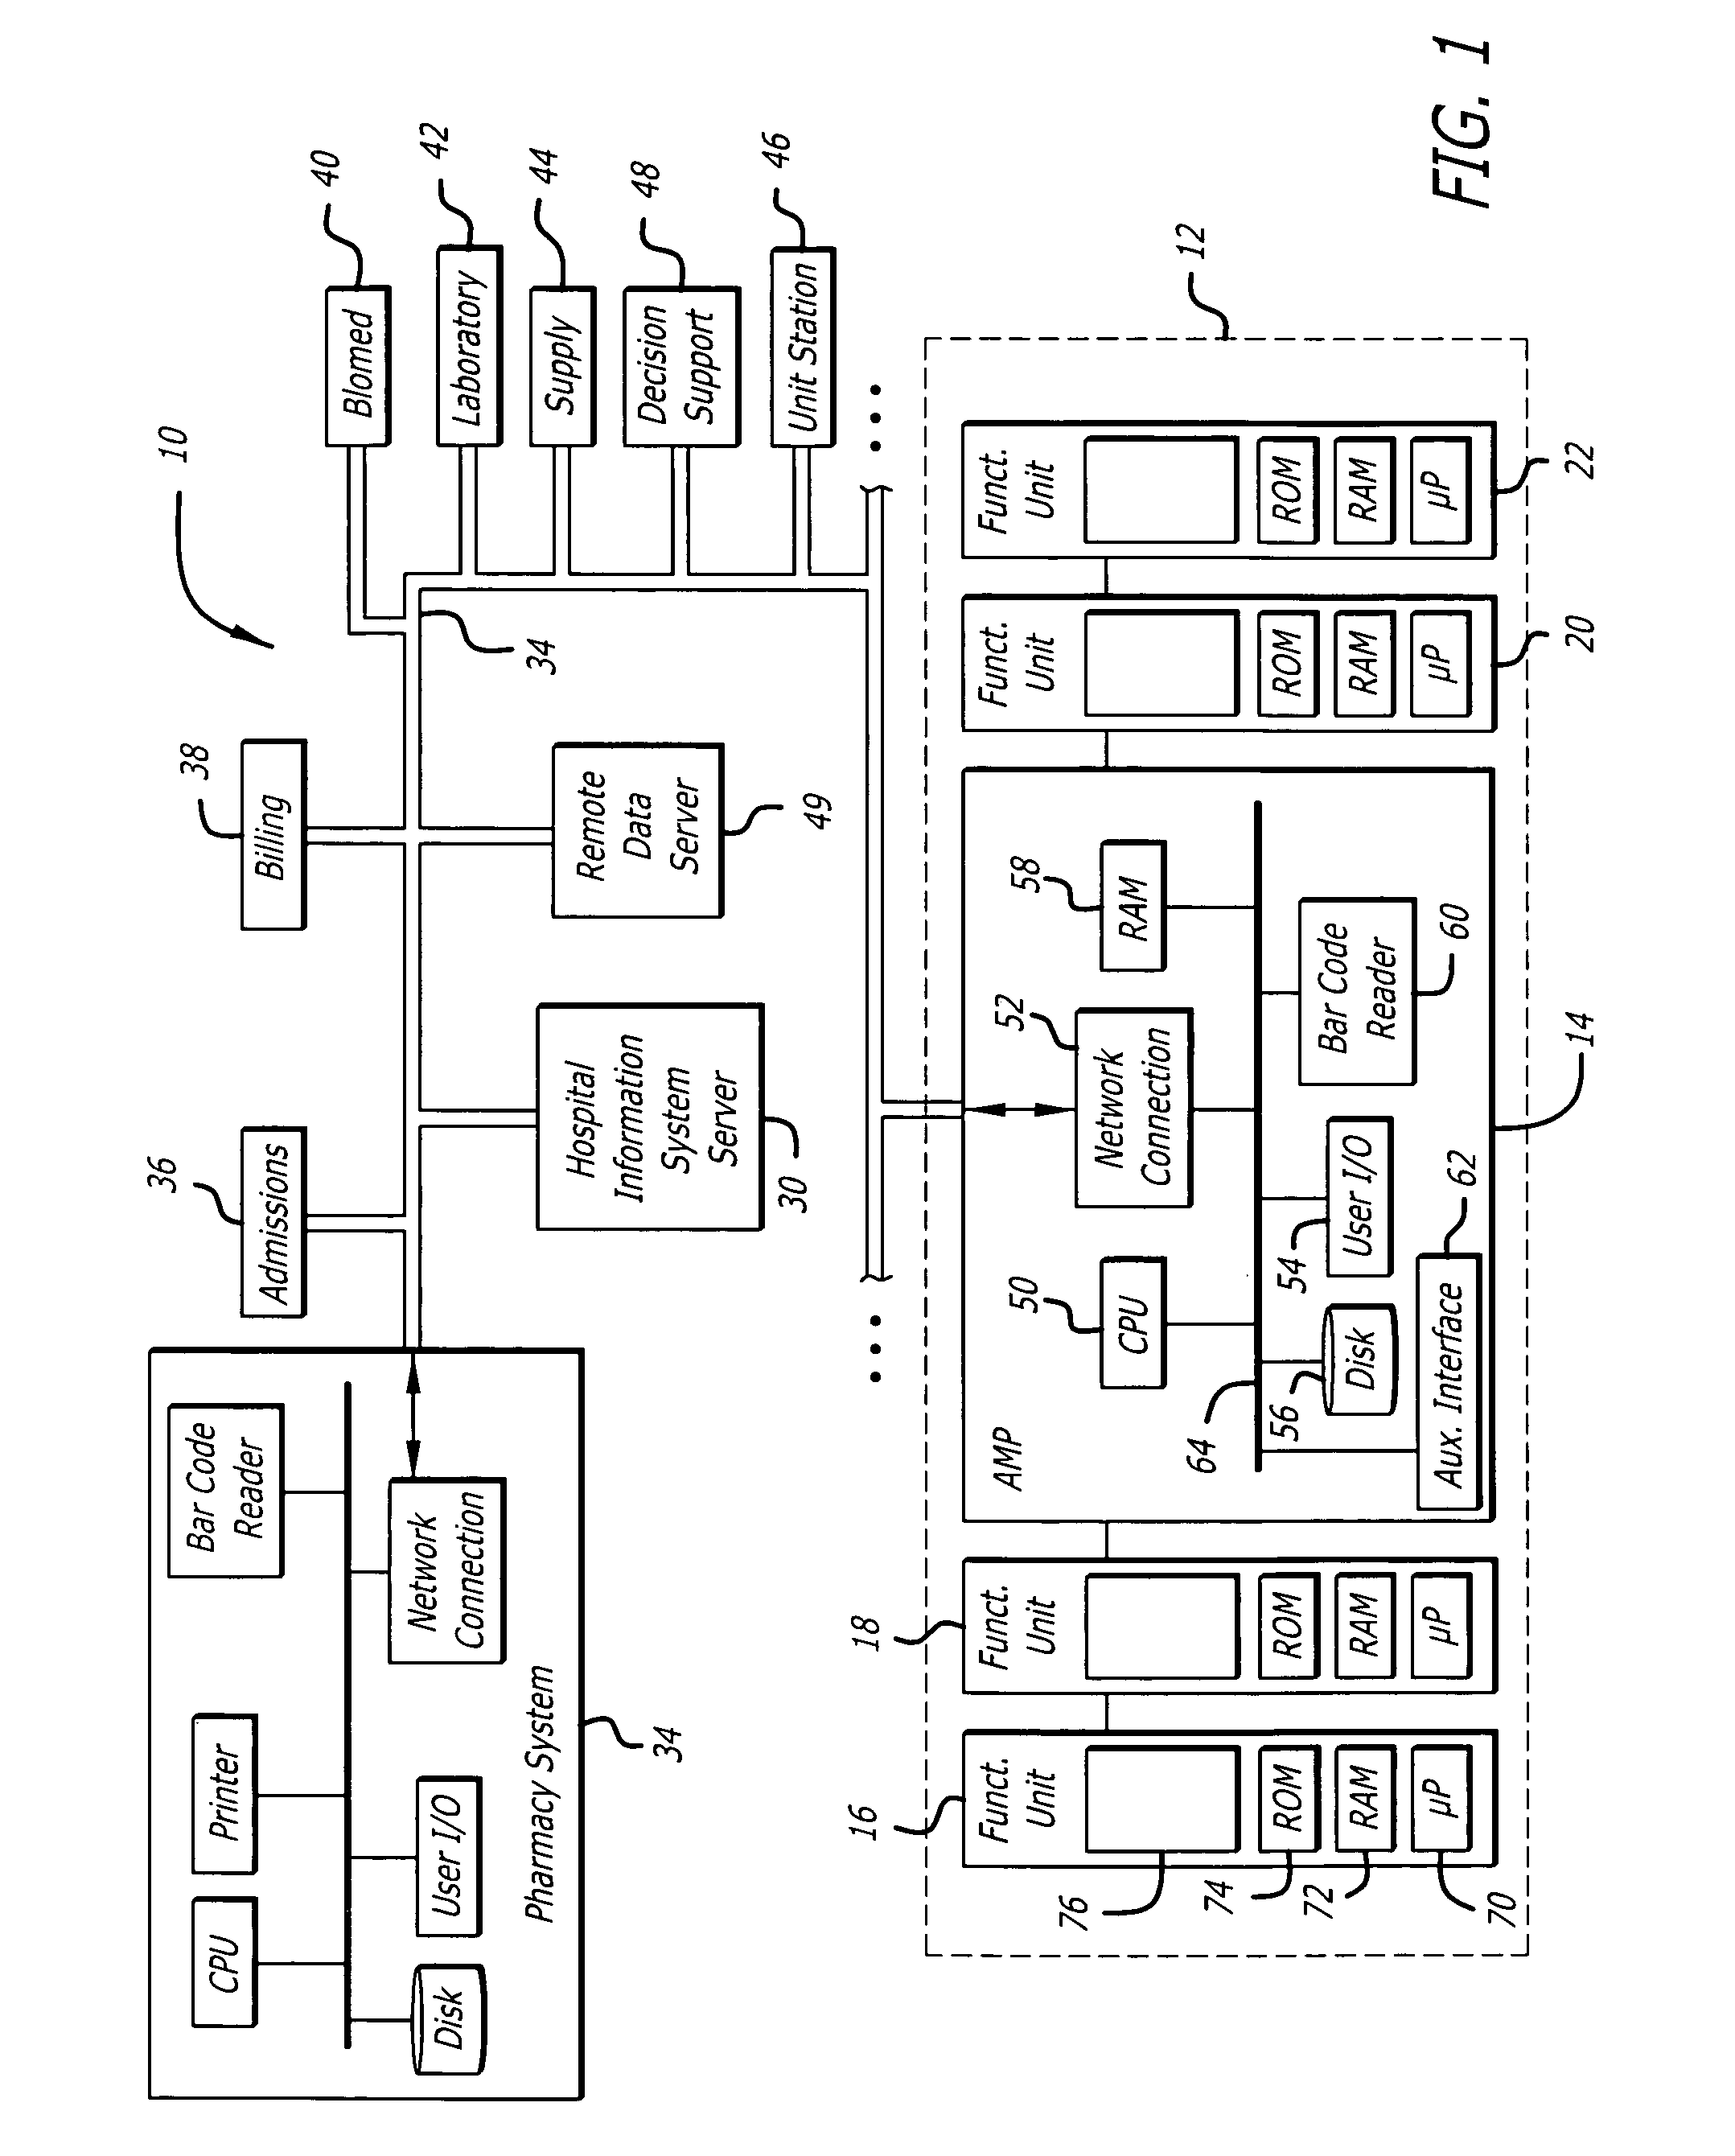 System and method for network discovery and connection management